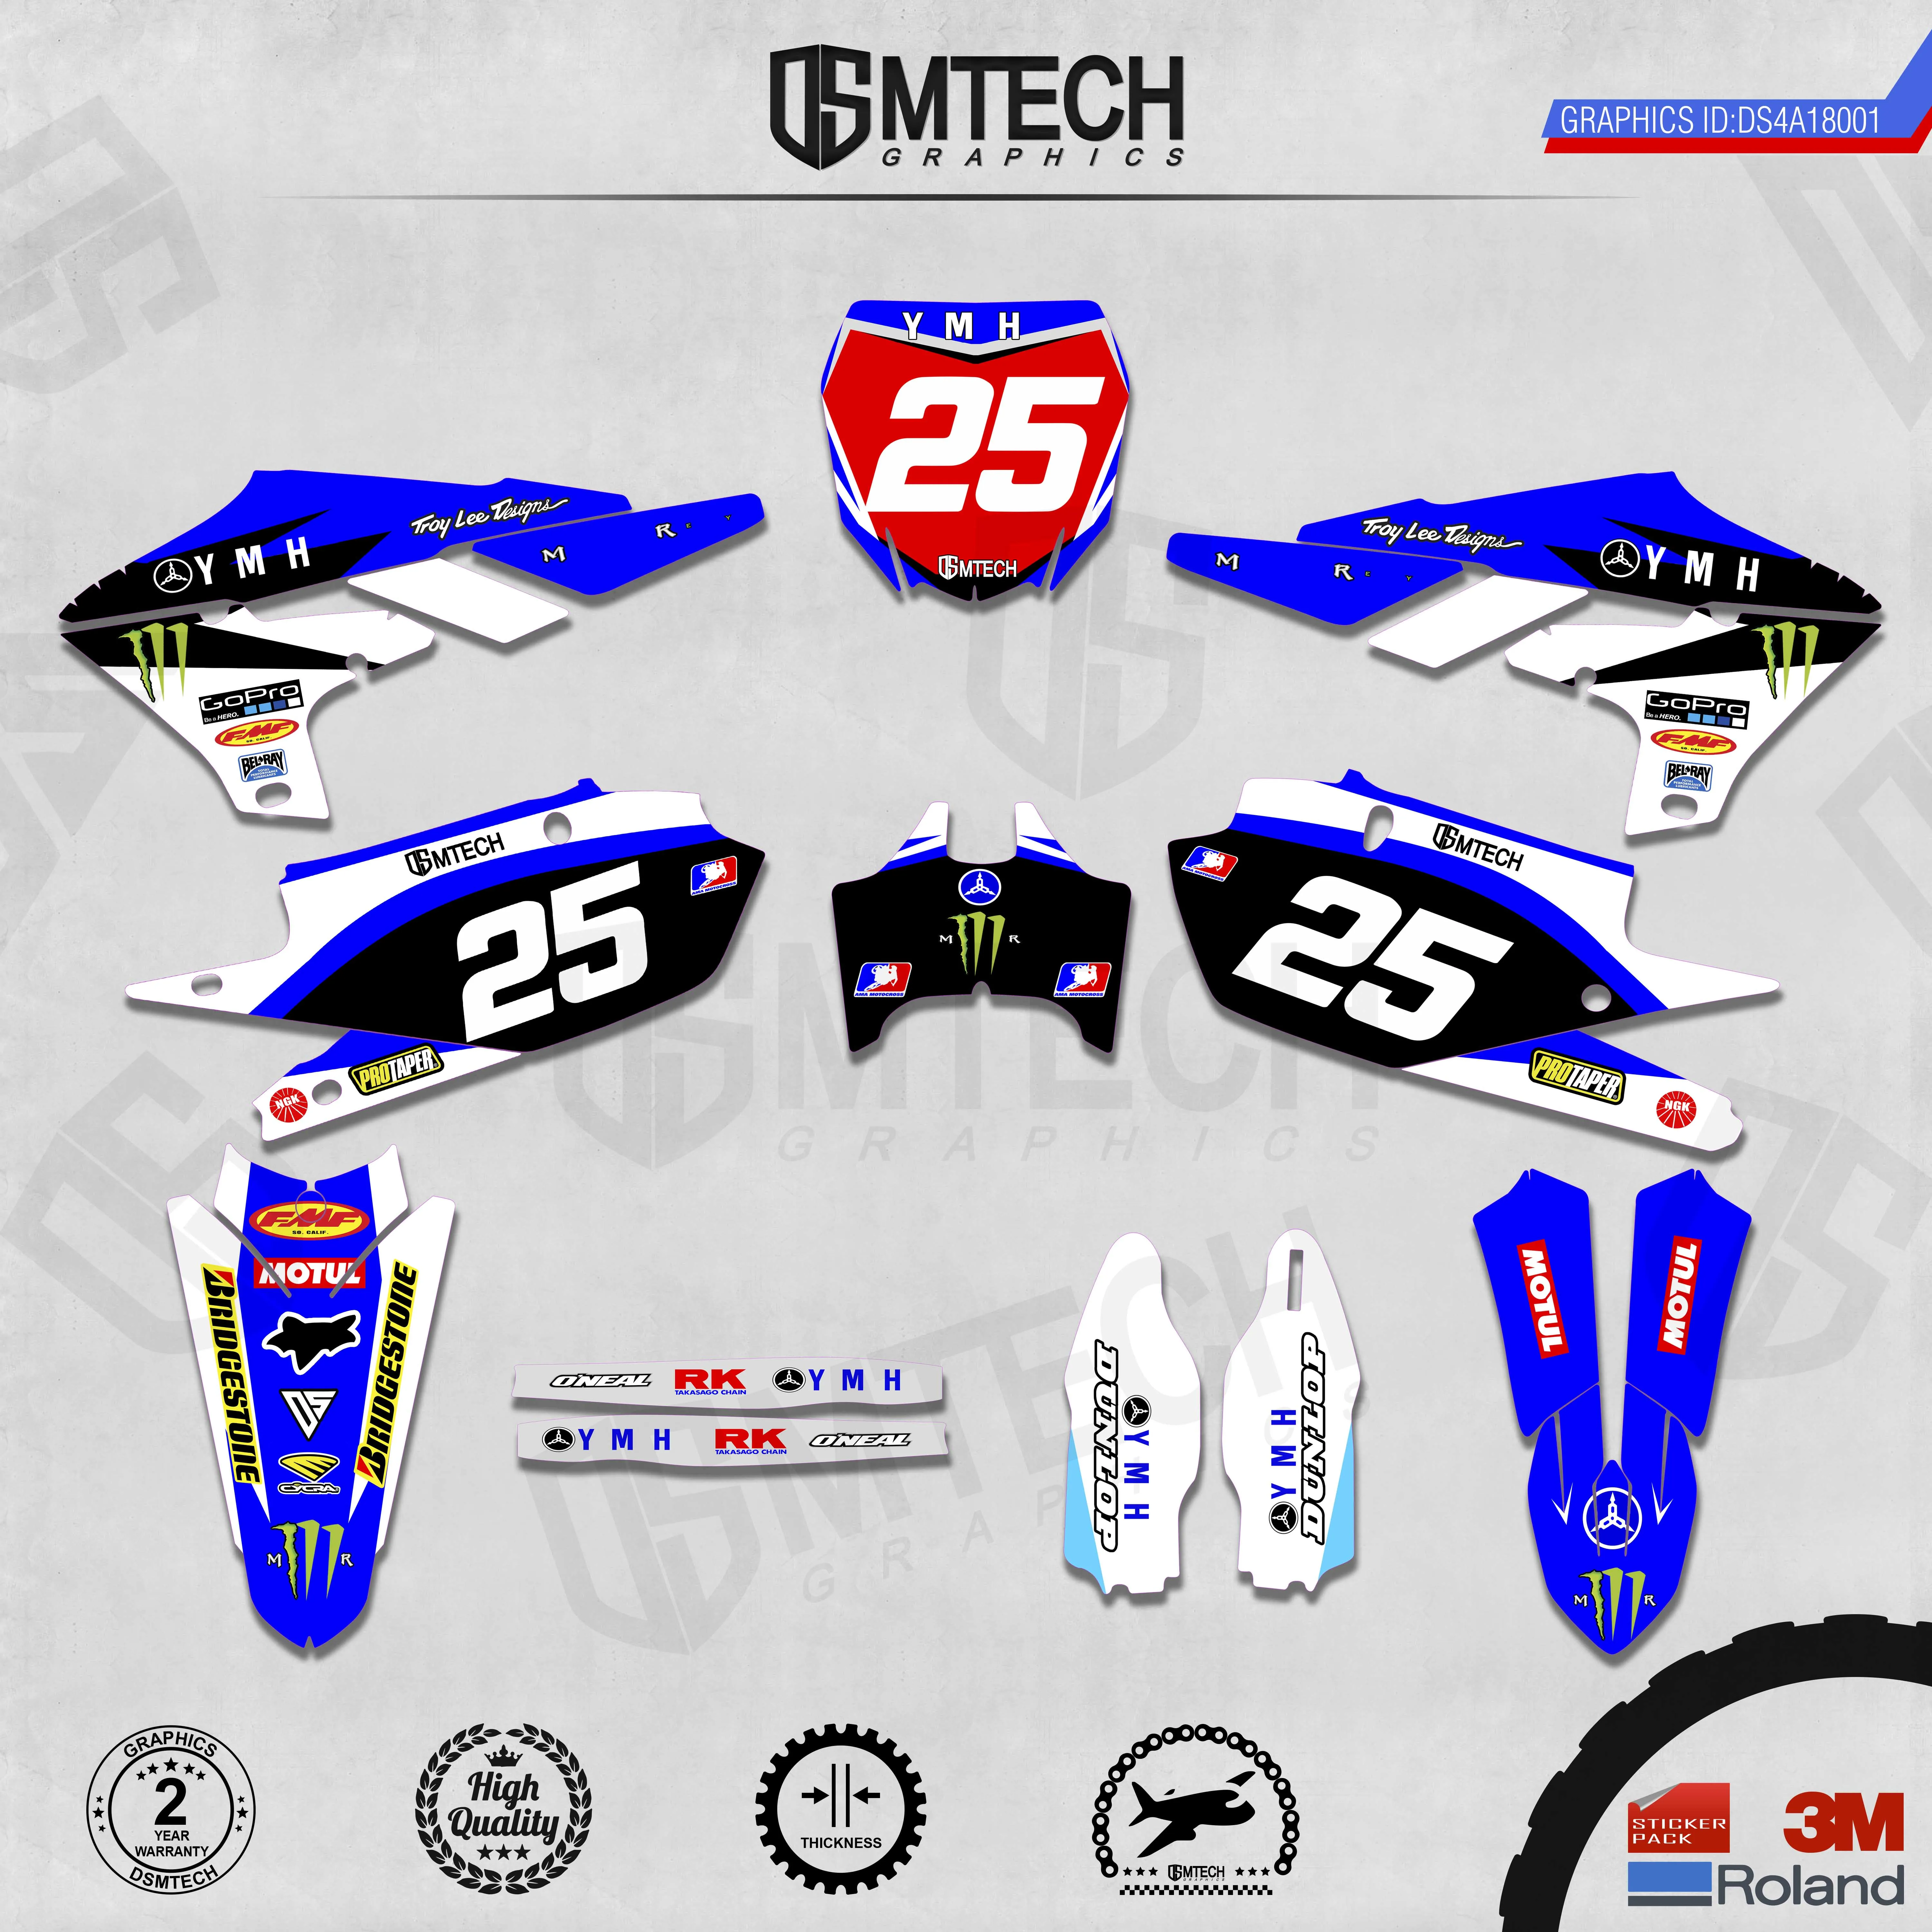 DSMTECH Customized Team Graphics Backgrounds Decals 3M Custom Stickers For 19YZ250F 18-19YZ450F 19-21WR450F Two Stroke   001